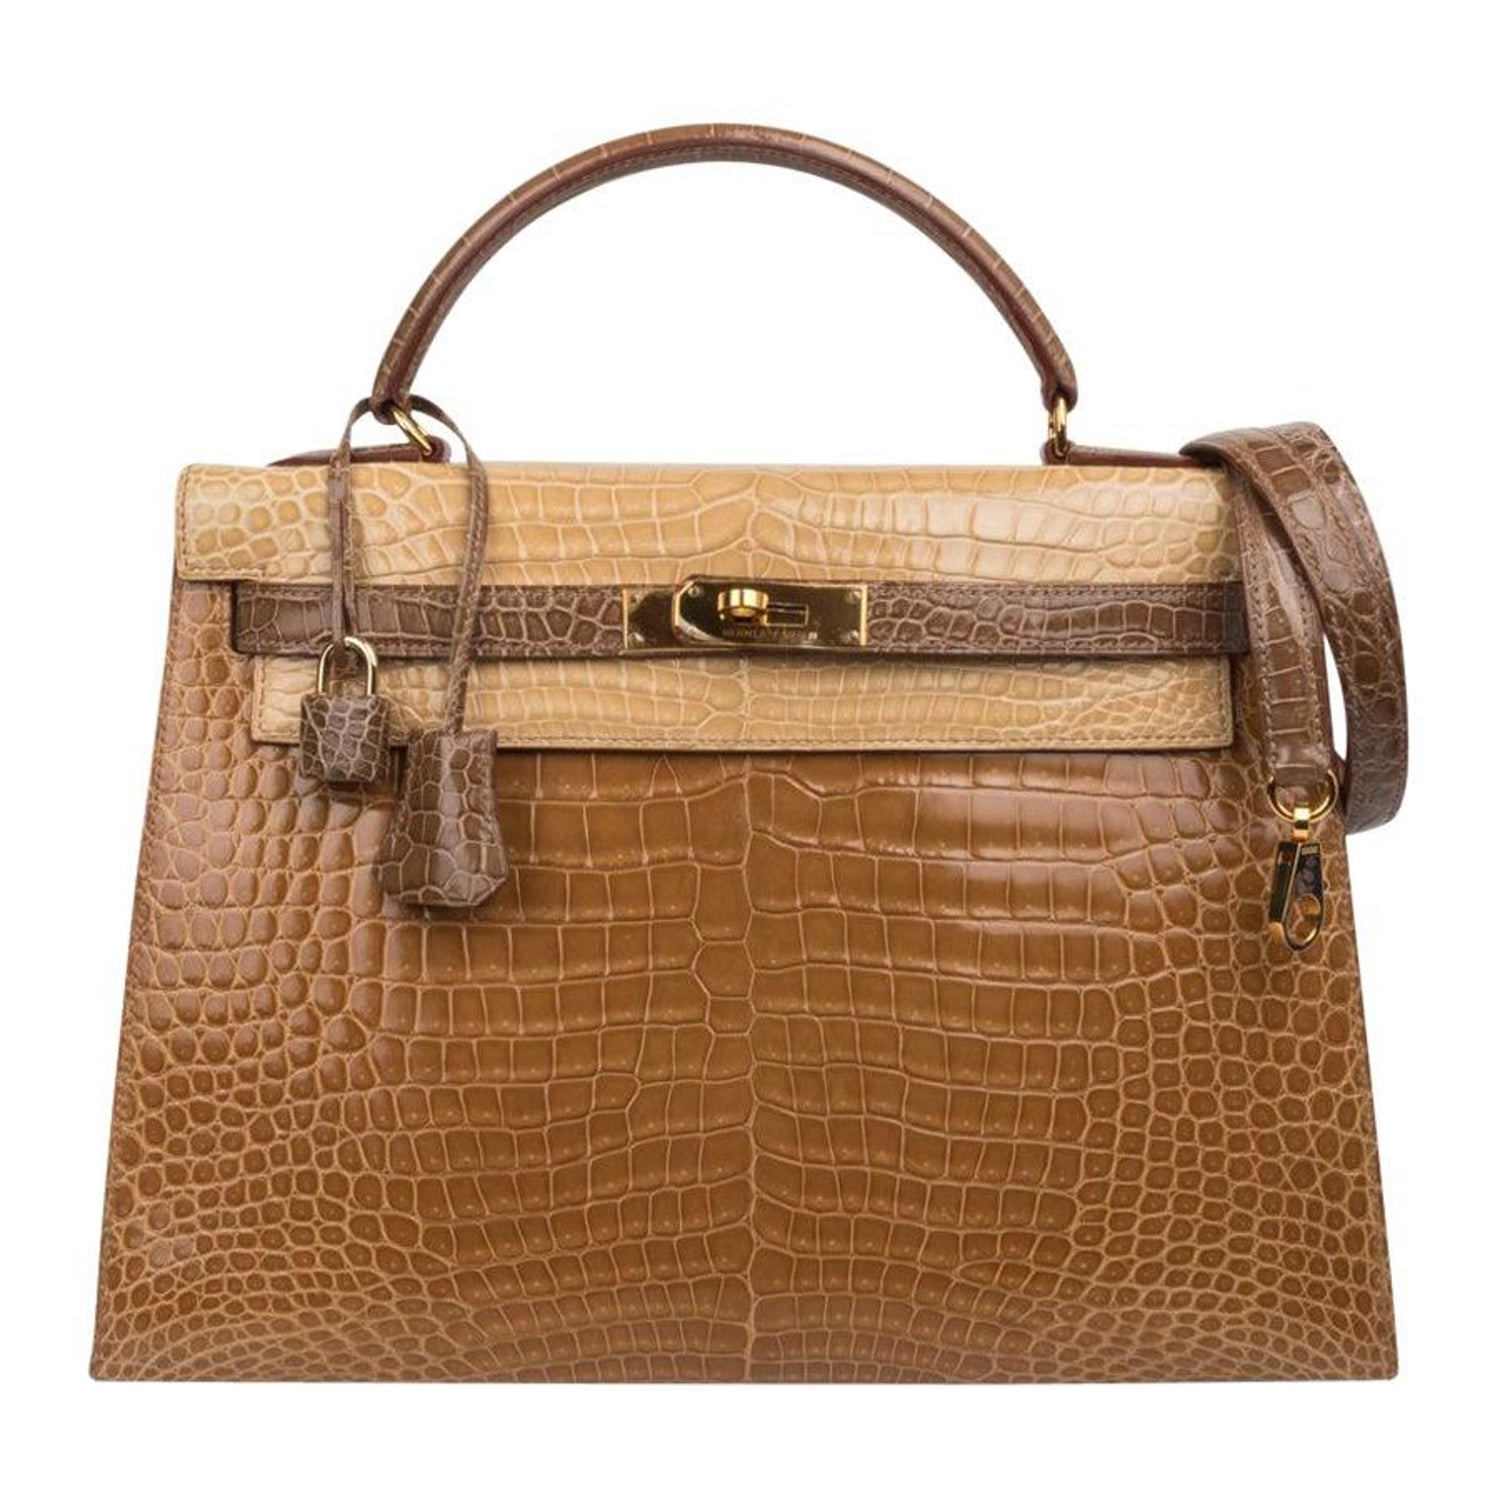 Jaune Sellier Kelly 32cm in Epsom Leather with Gold Hardware, 2000, Handbags & Accessories, 2021